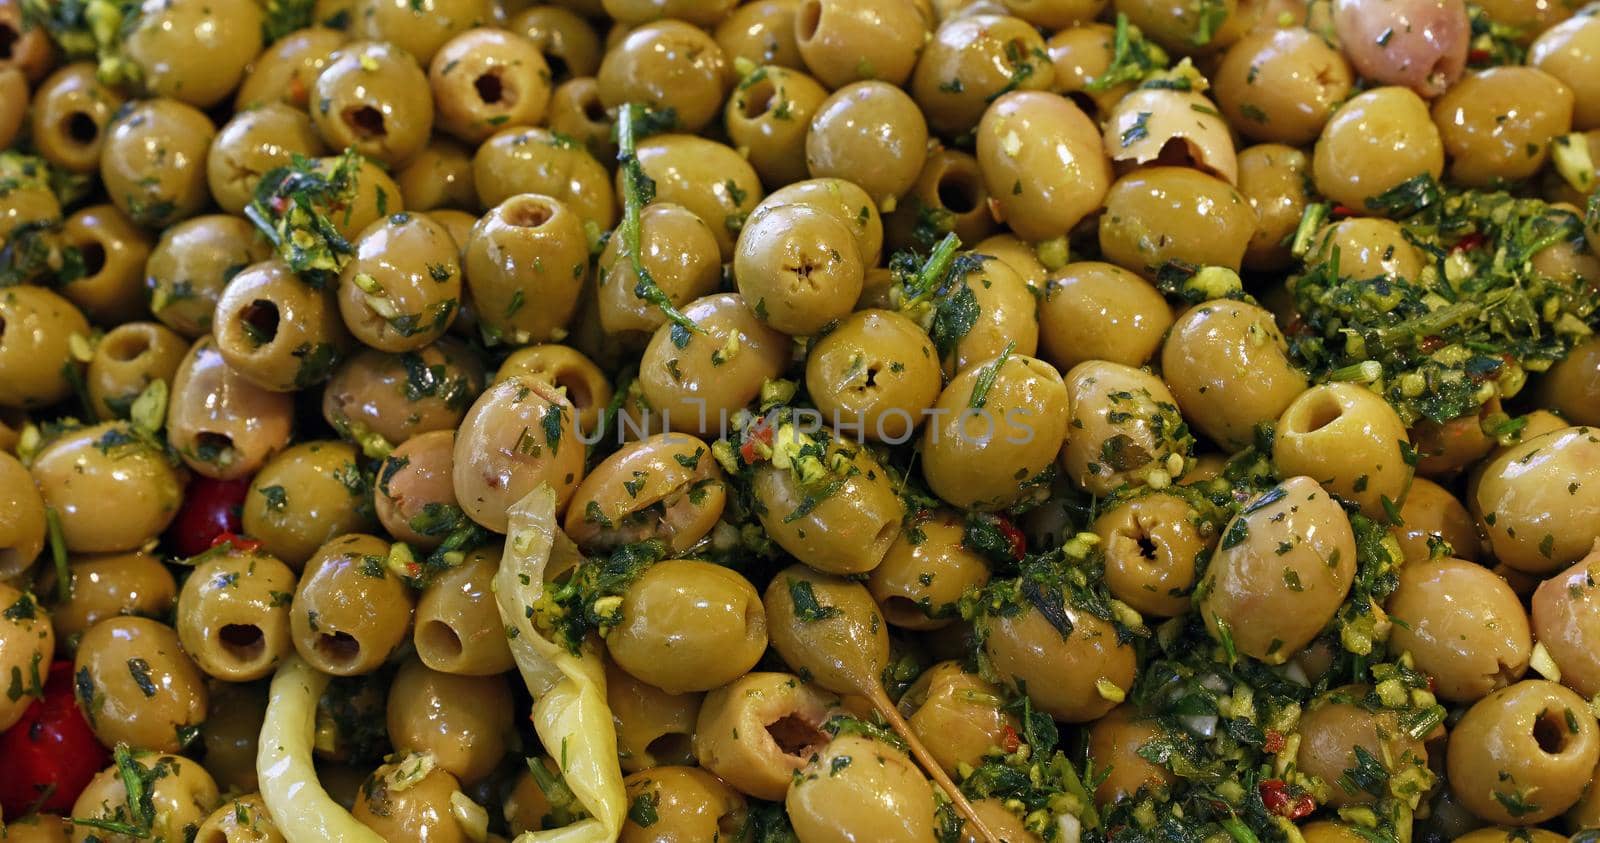 Close up background of traditional artisanal pickled green olives with spice herbs on retail display of open market, high angle view